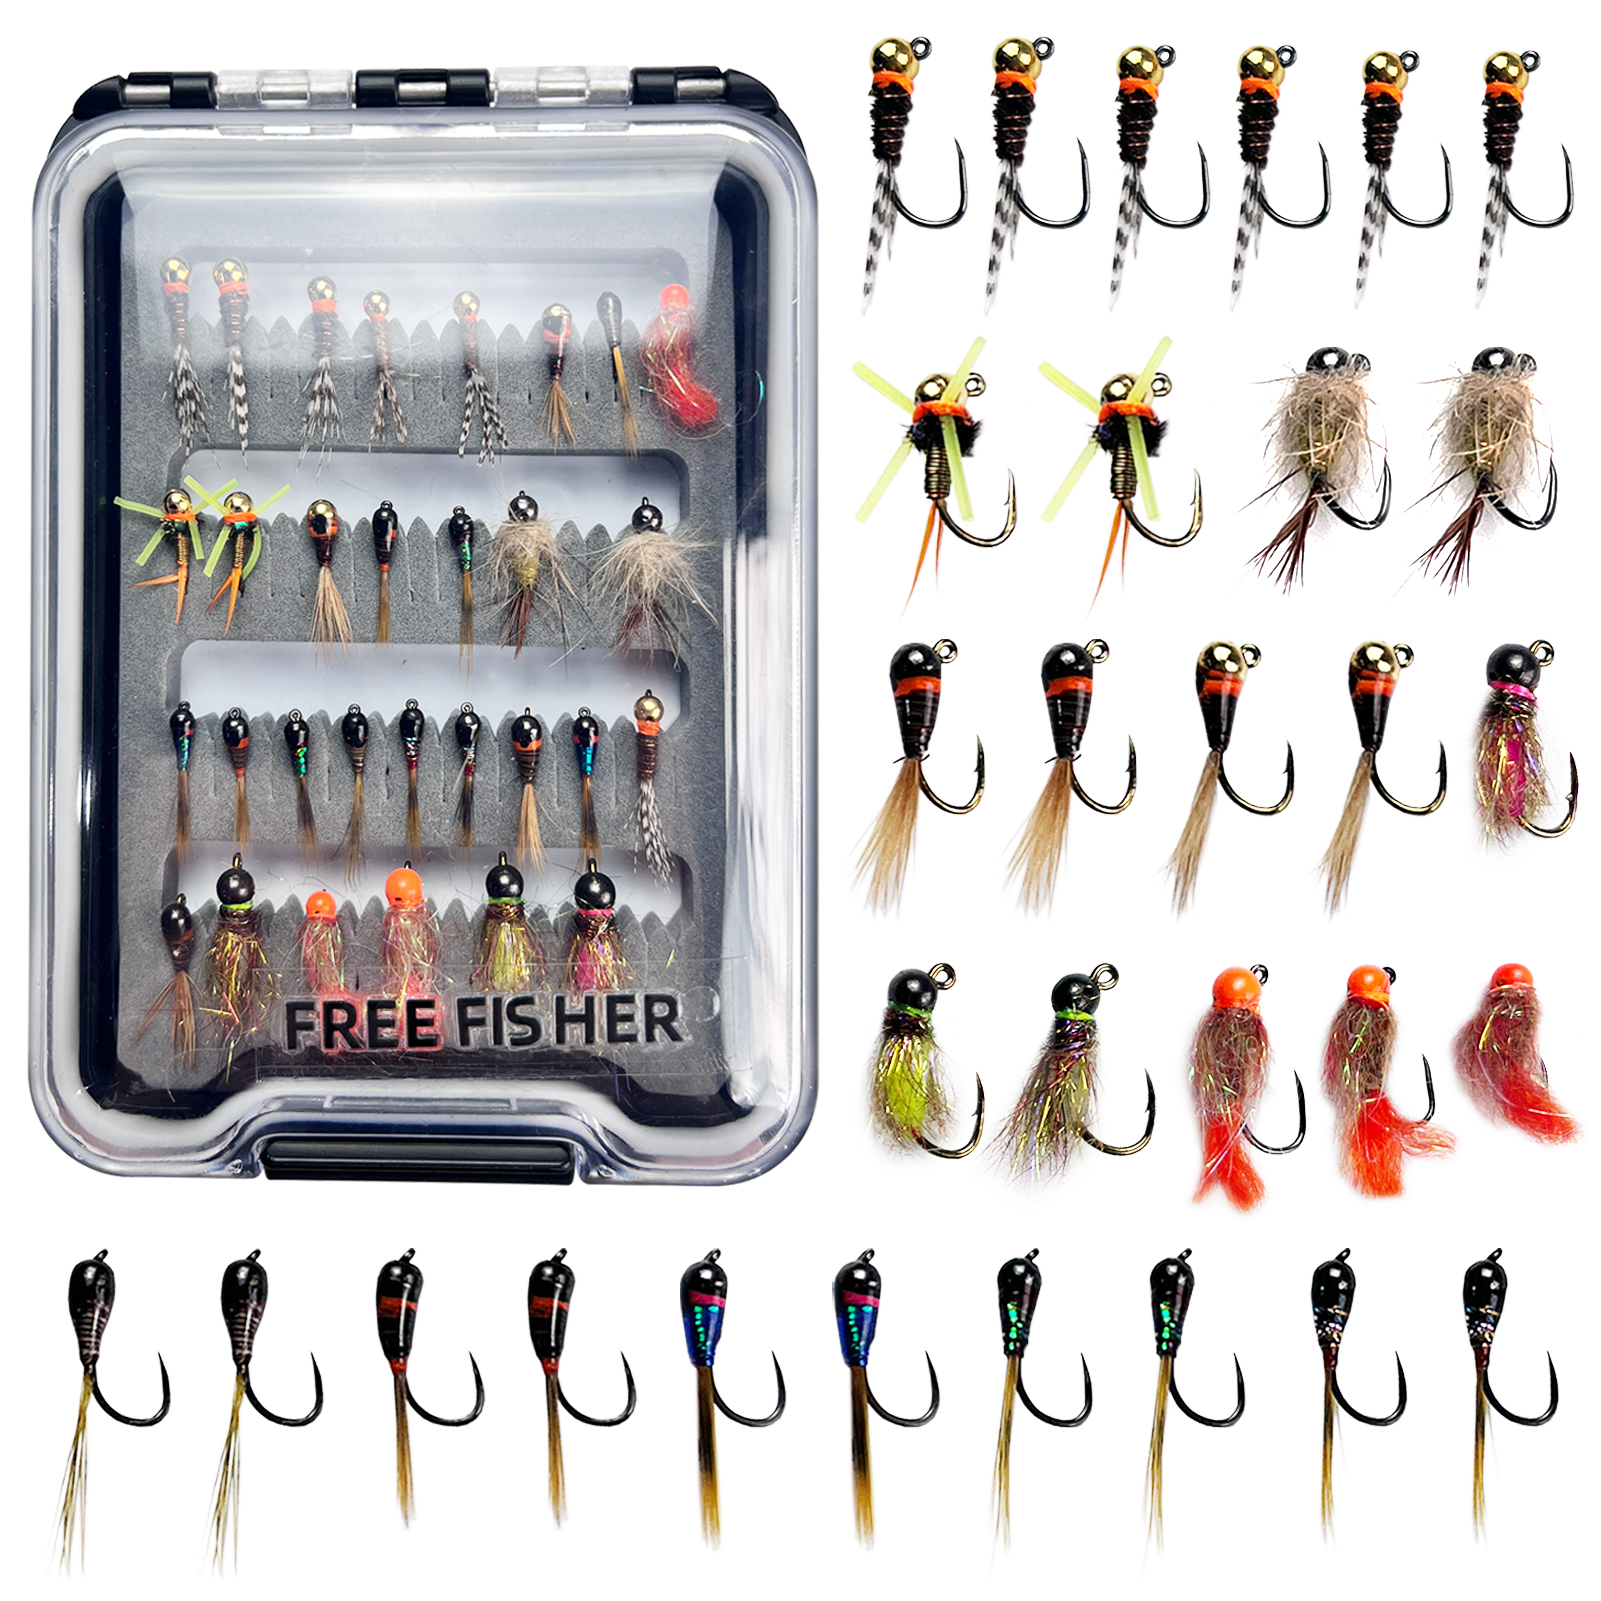 FREE FISHER Fishing Flies Set with Fly Box Squirmy Worm Nymph Flies Hooks Feather Fly Fishing Baits Tungsten Head Sharp Fishhook for Freshwater